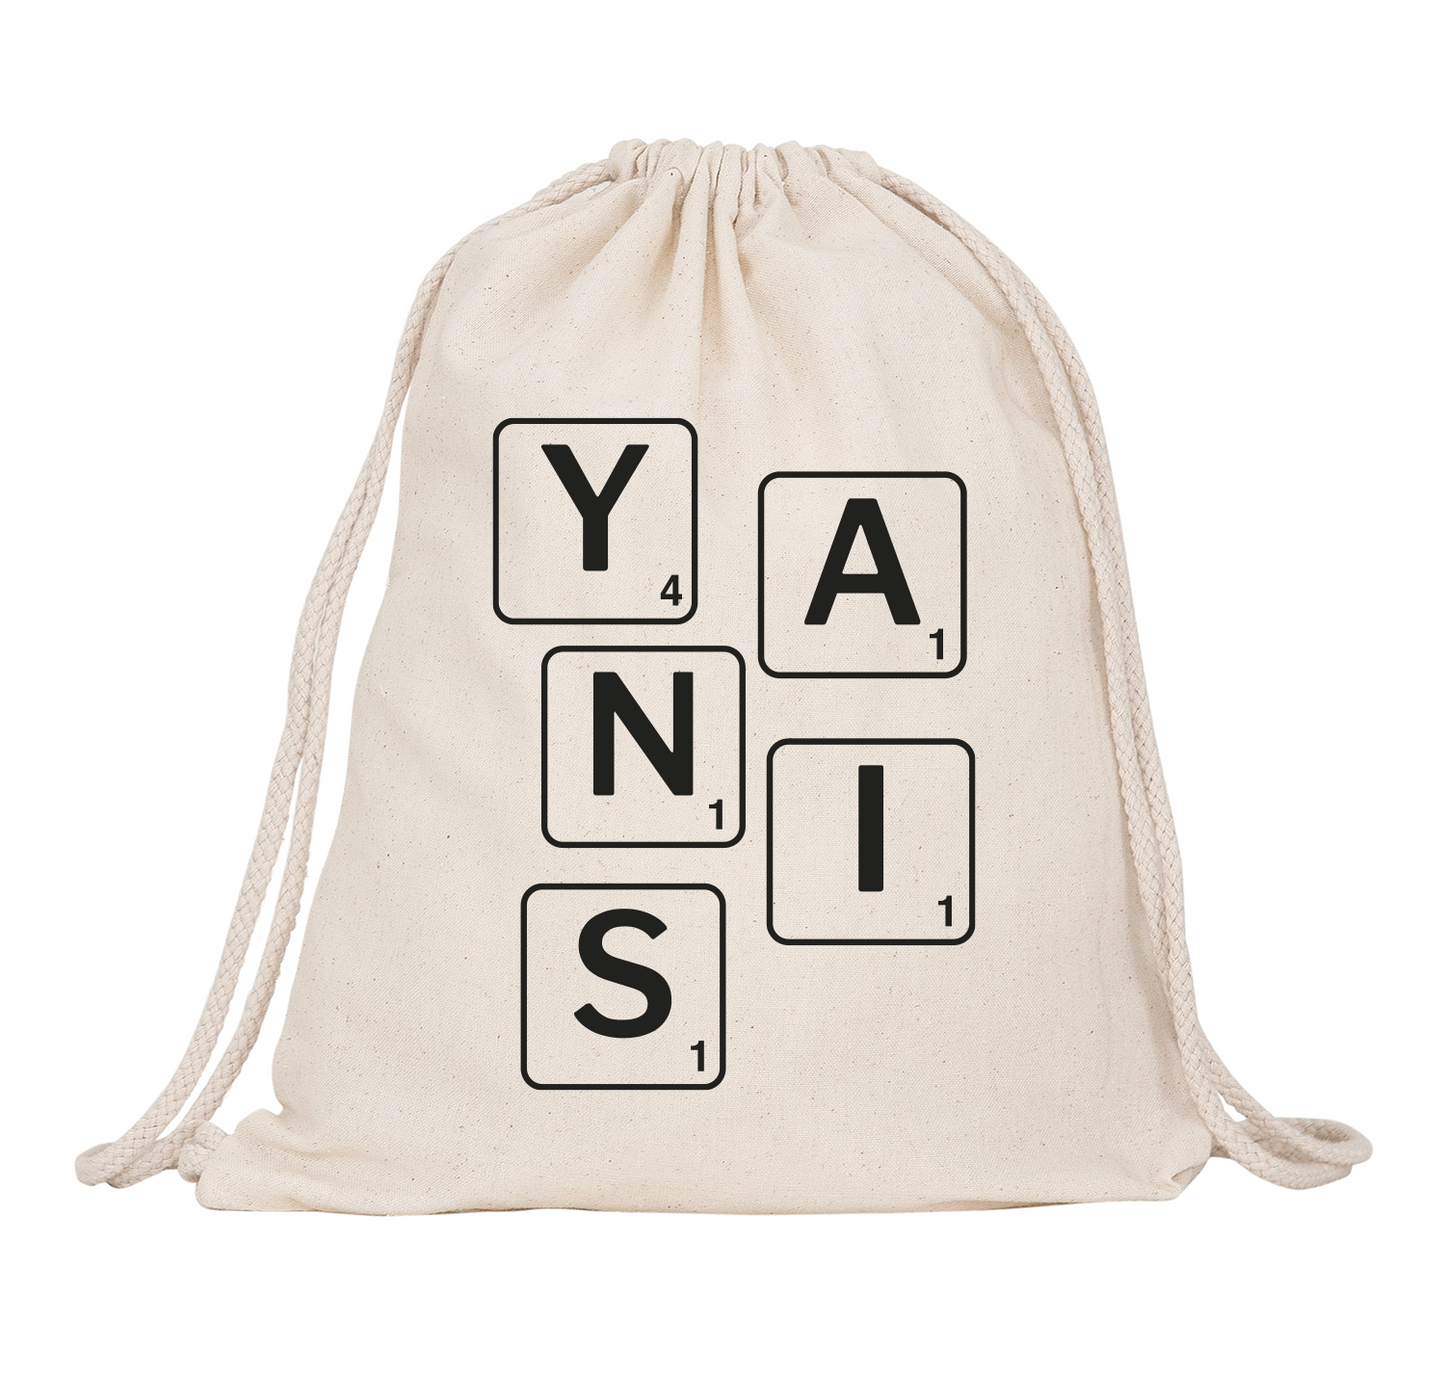 Personalized Kids Bag with Scrabble Monochrome Name